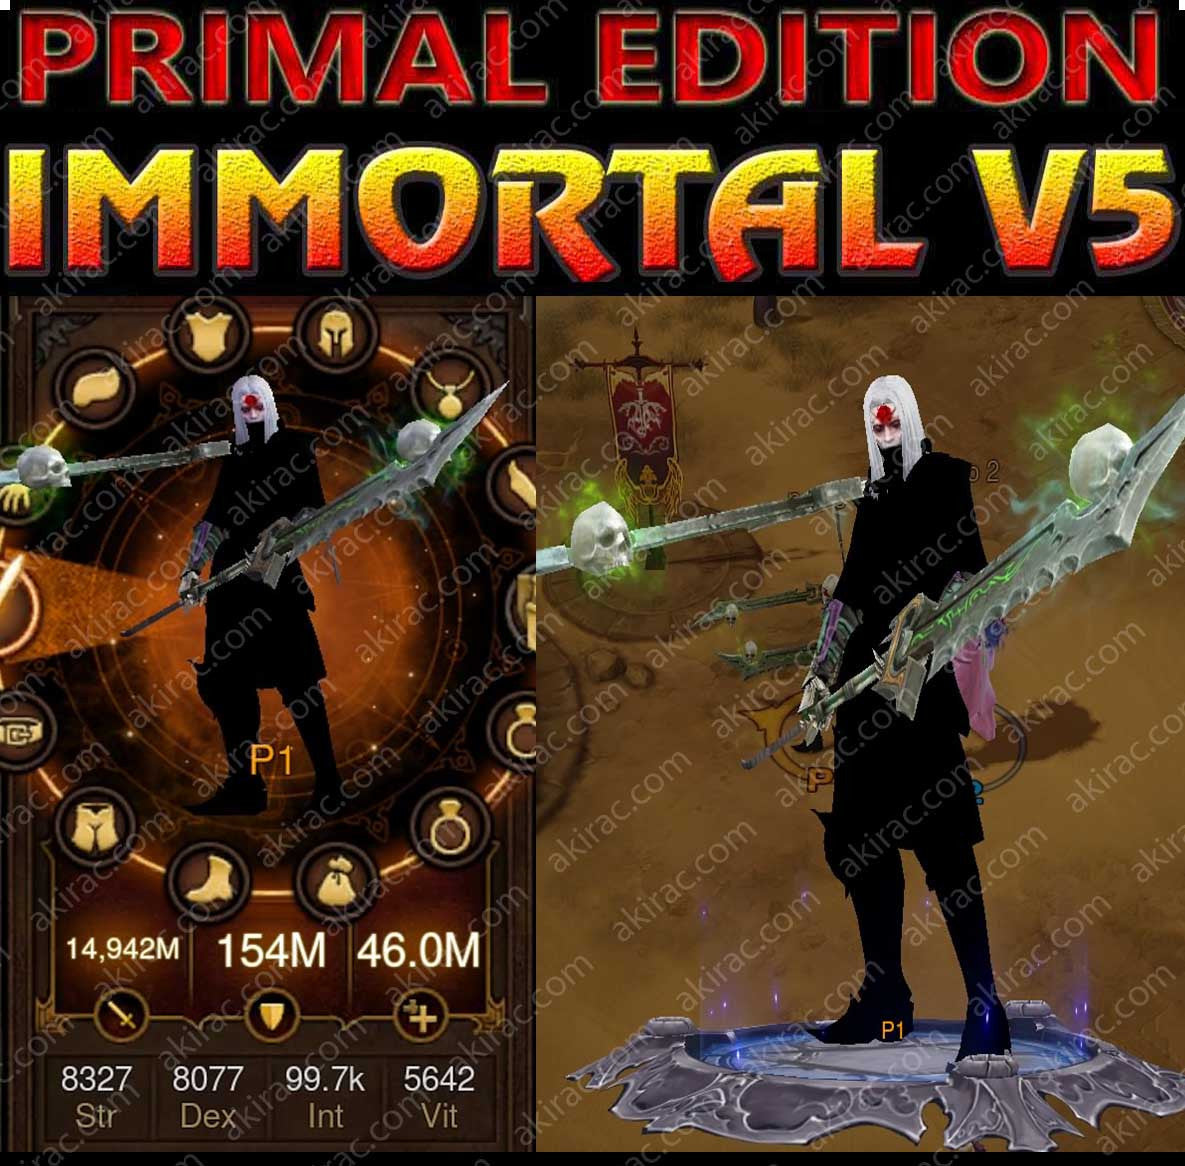 [Primal Ancient] Diablo 3 Immortal v5 Null Modded Necromancer Pestilence Set Diablo 3 Mods ROS Seasonal and Non Seasonal Save Mod - Modded Items and Gear - Hacks - Cheats - Trainers for Playstation 4 - Playstation 5 - Nintendo Switch - Xbox One